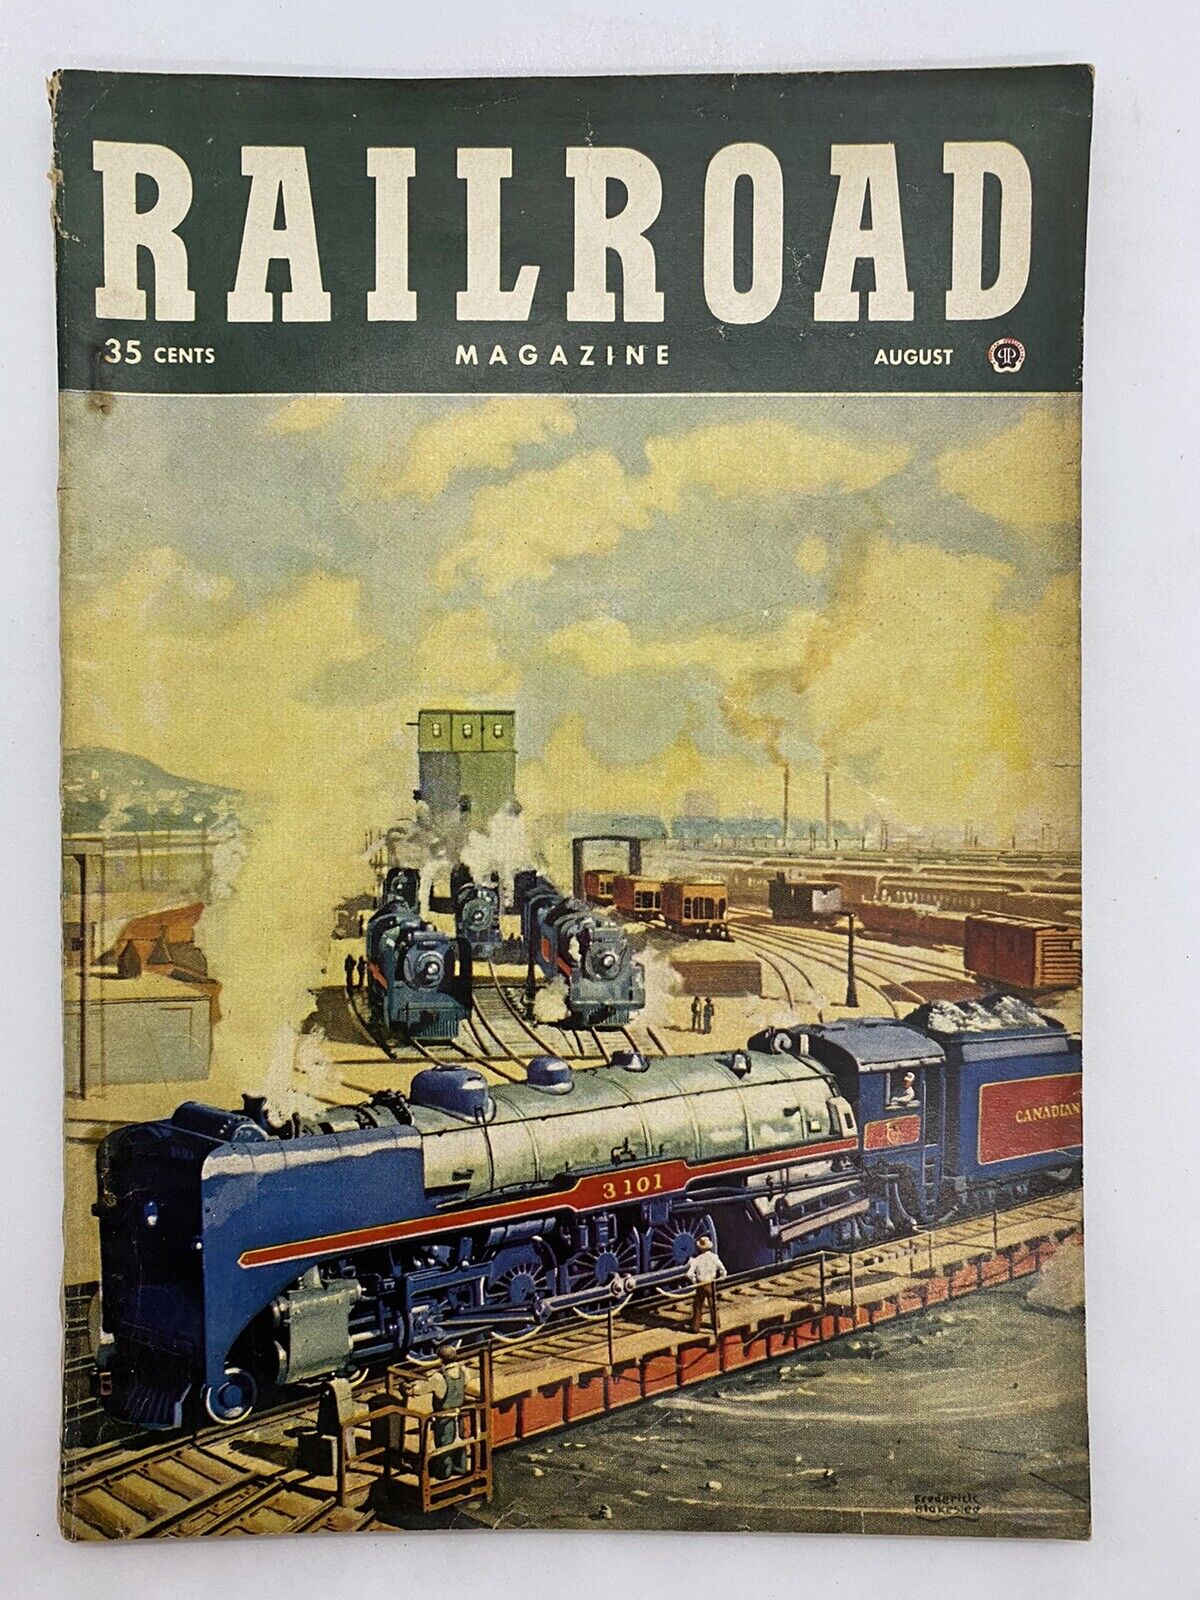 Vintage Aug. 1950 Railroad Magazines, MONTHLY ISSUE, Rare.